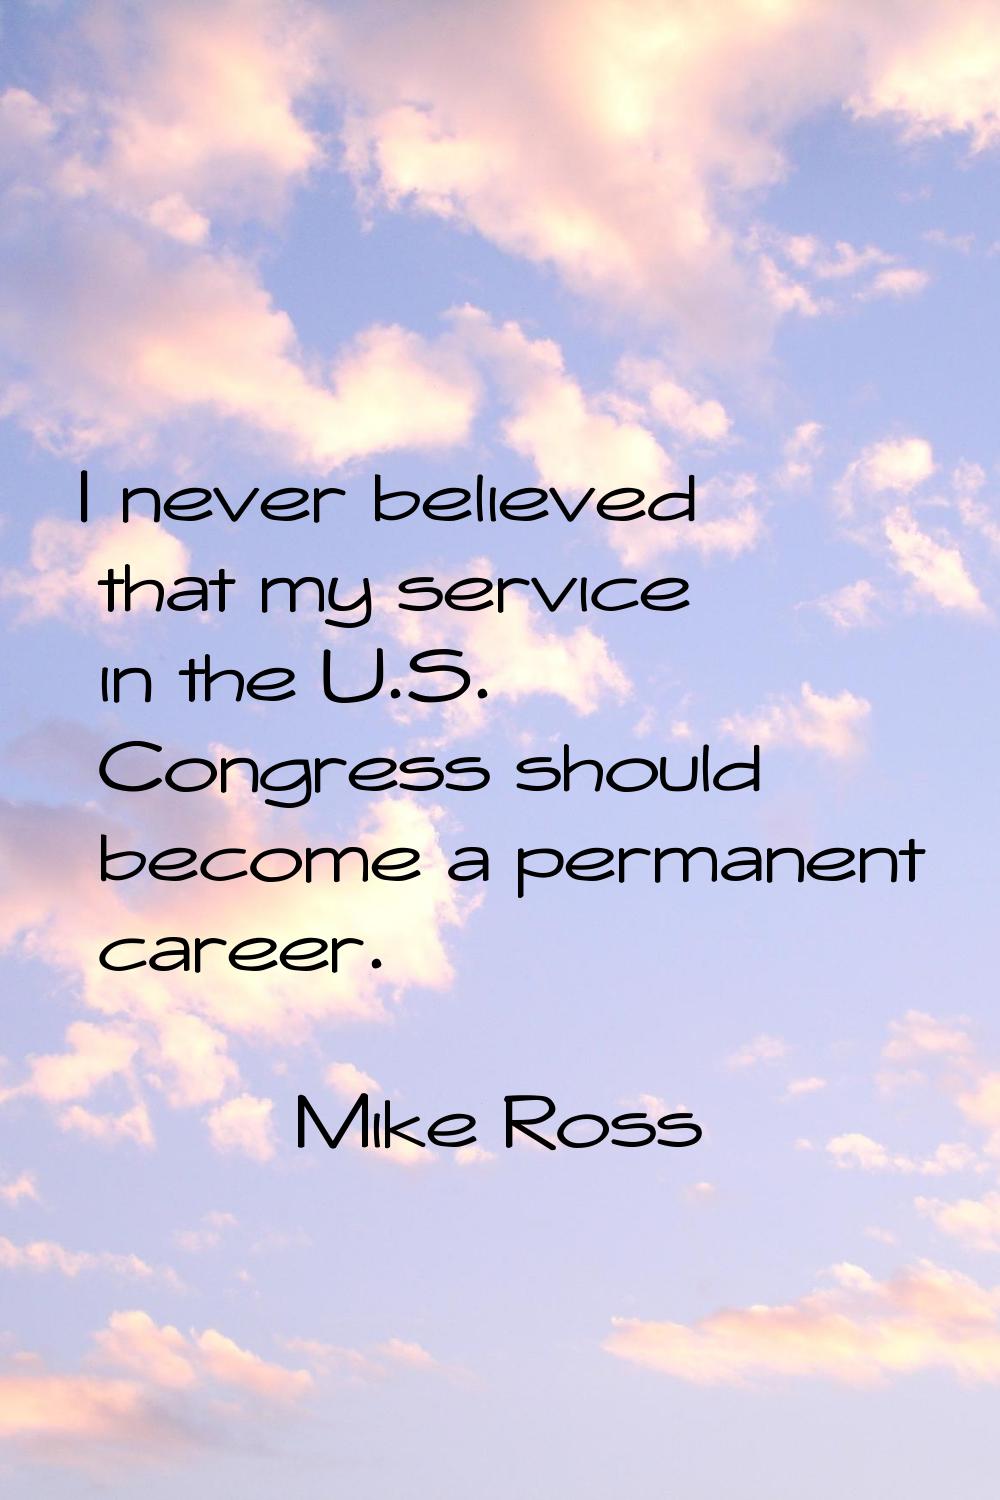 I never believed that my service in the U.S. Congress should become a permanent career.